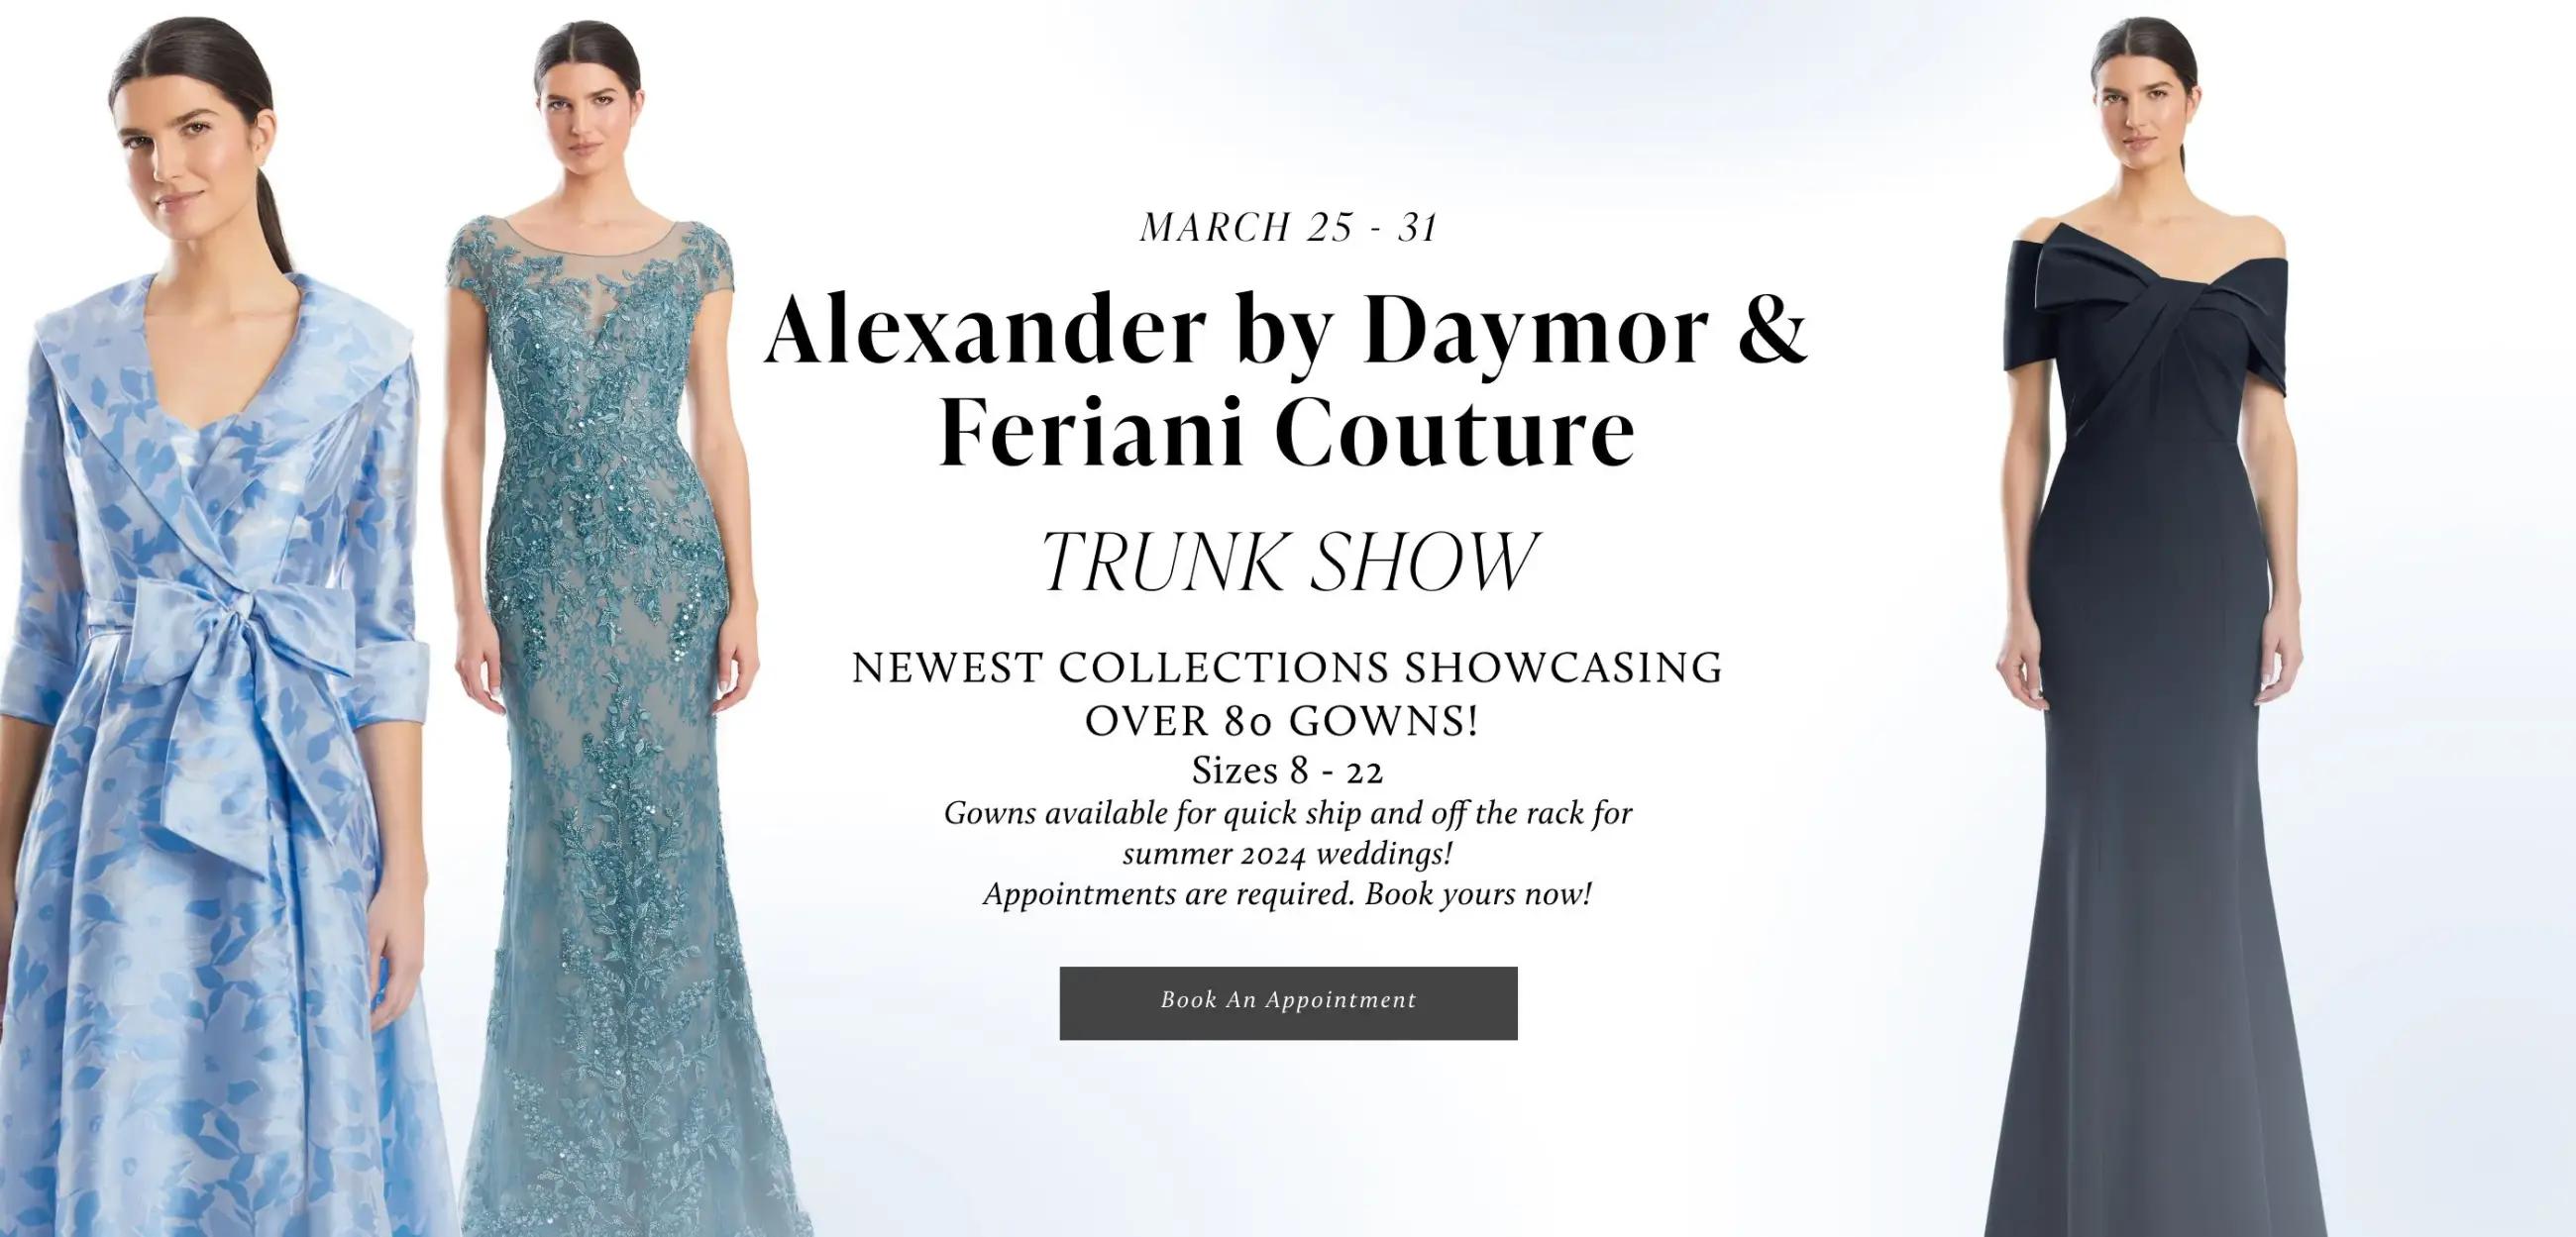 Alexander by Daymor & Feriani Couture banner